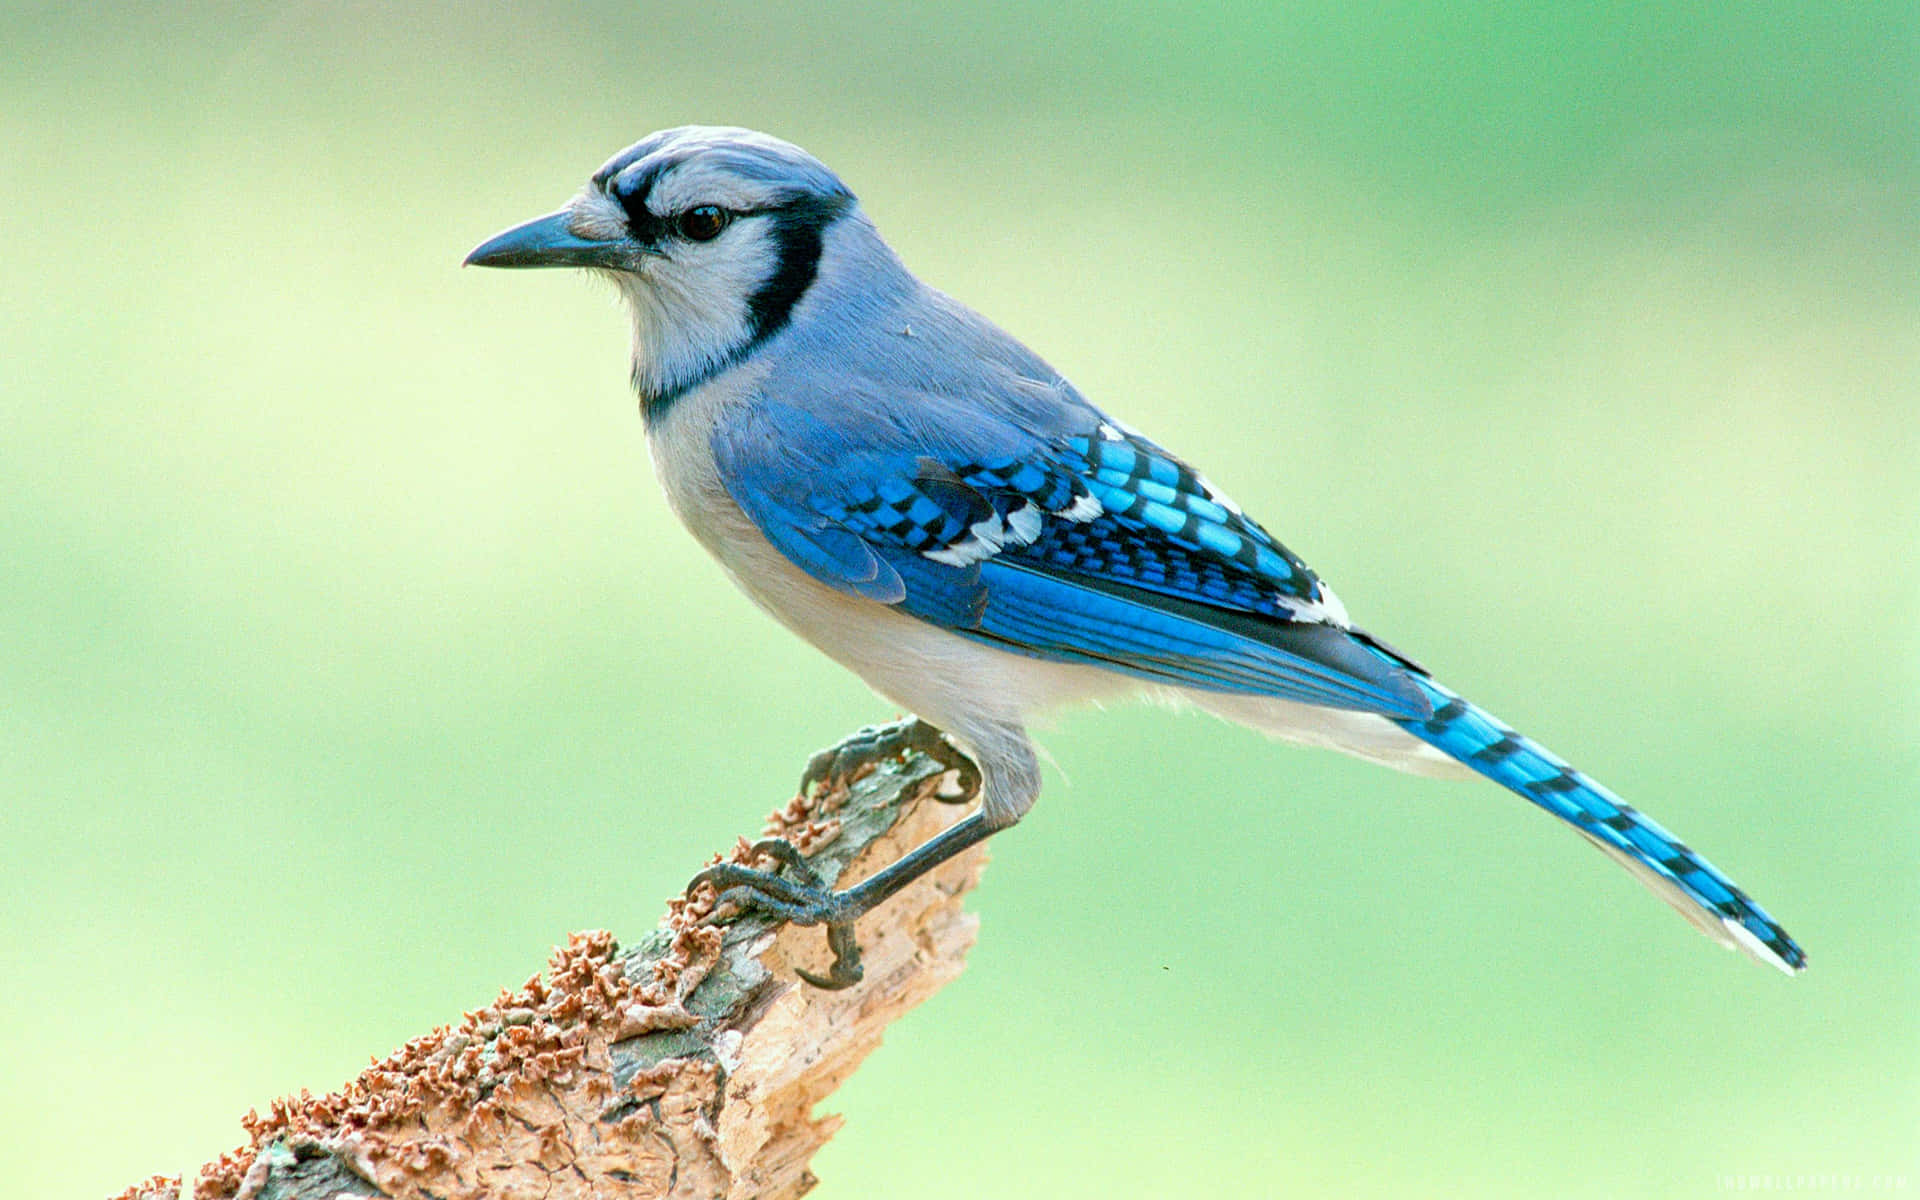 A Blue Jay Lifts its wings to Fly